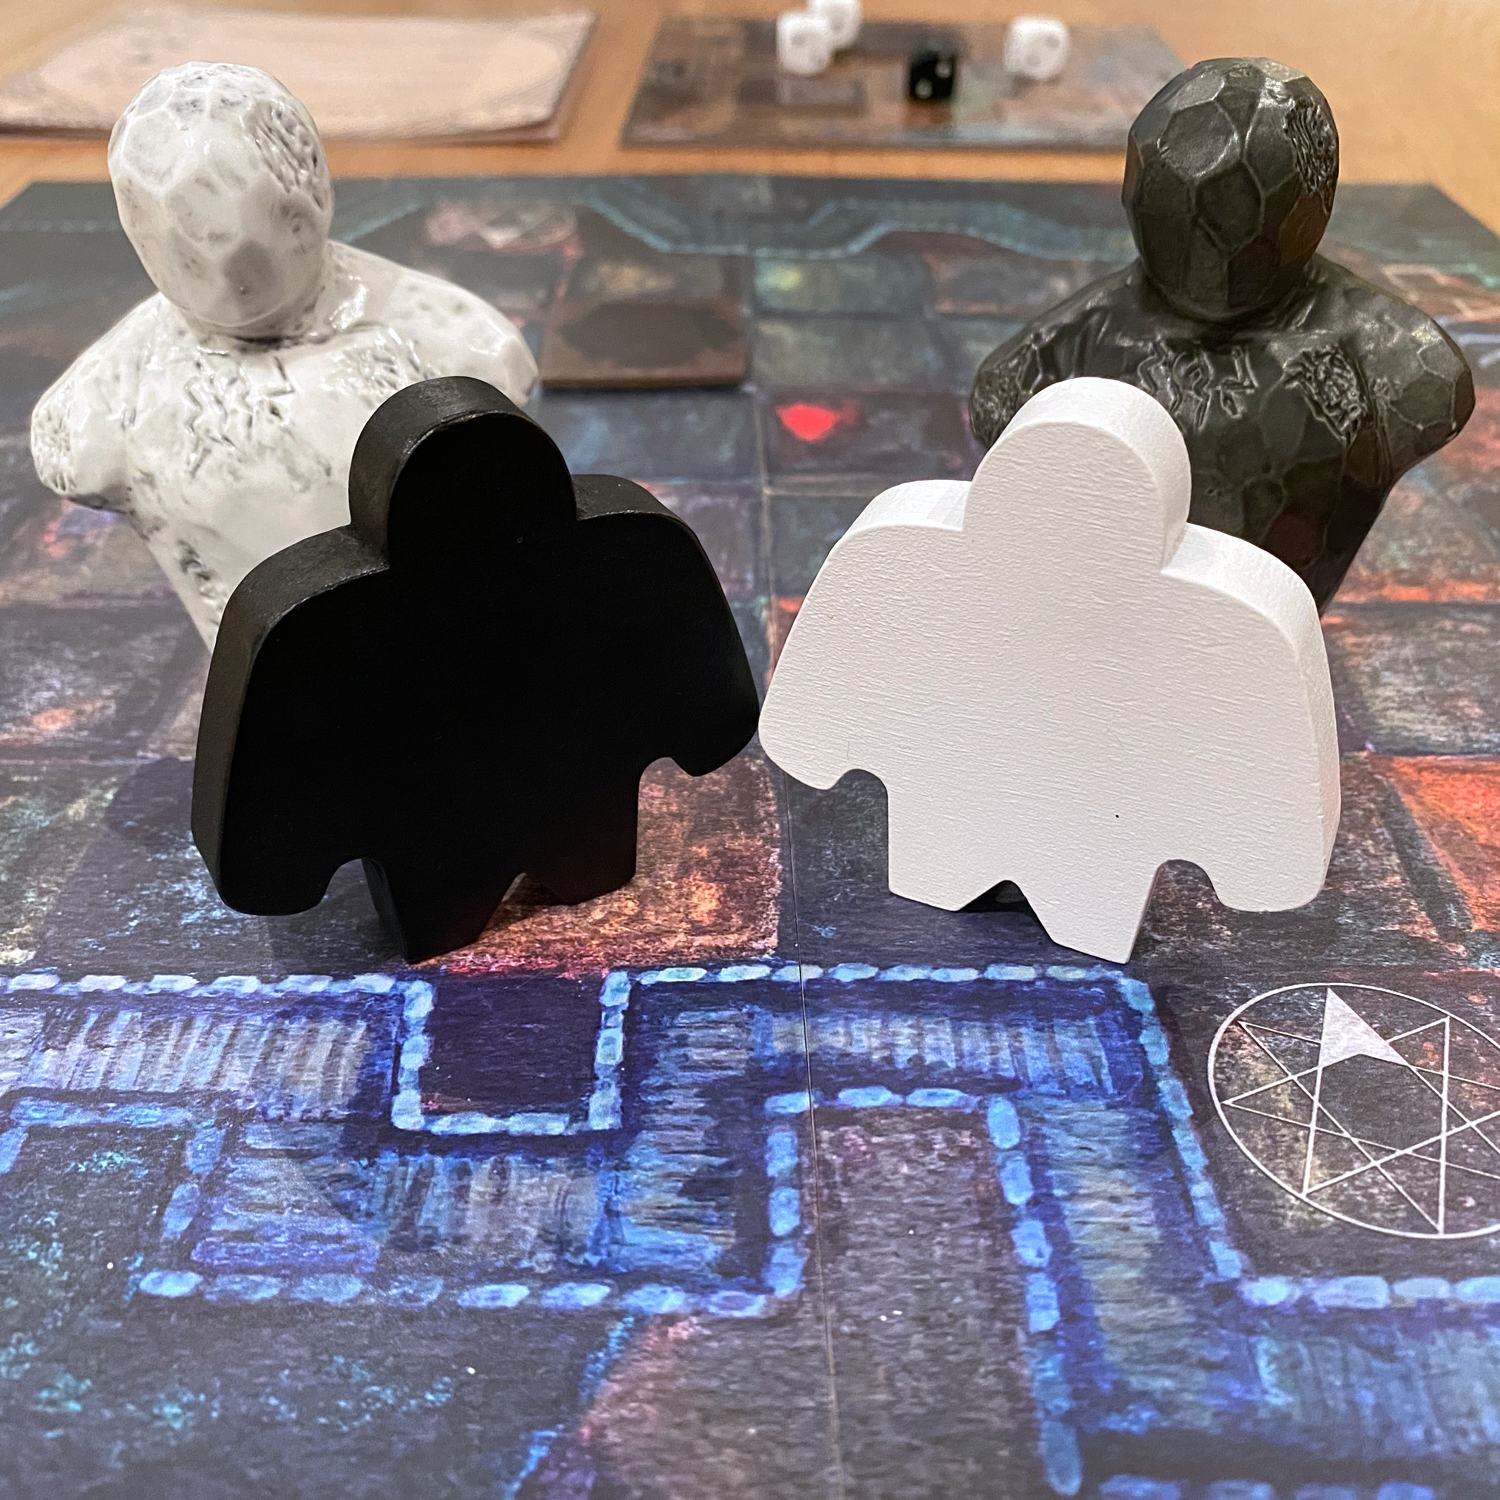 Golem comparison between standard and deluxeImage © Board Game Review UK